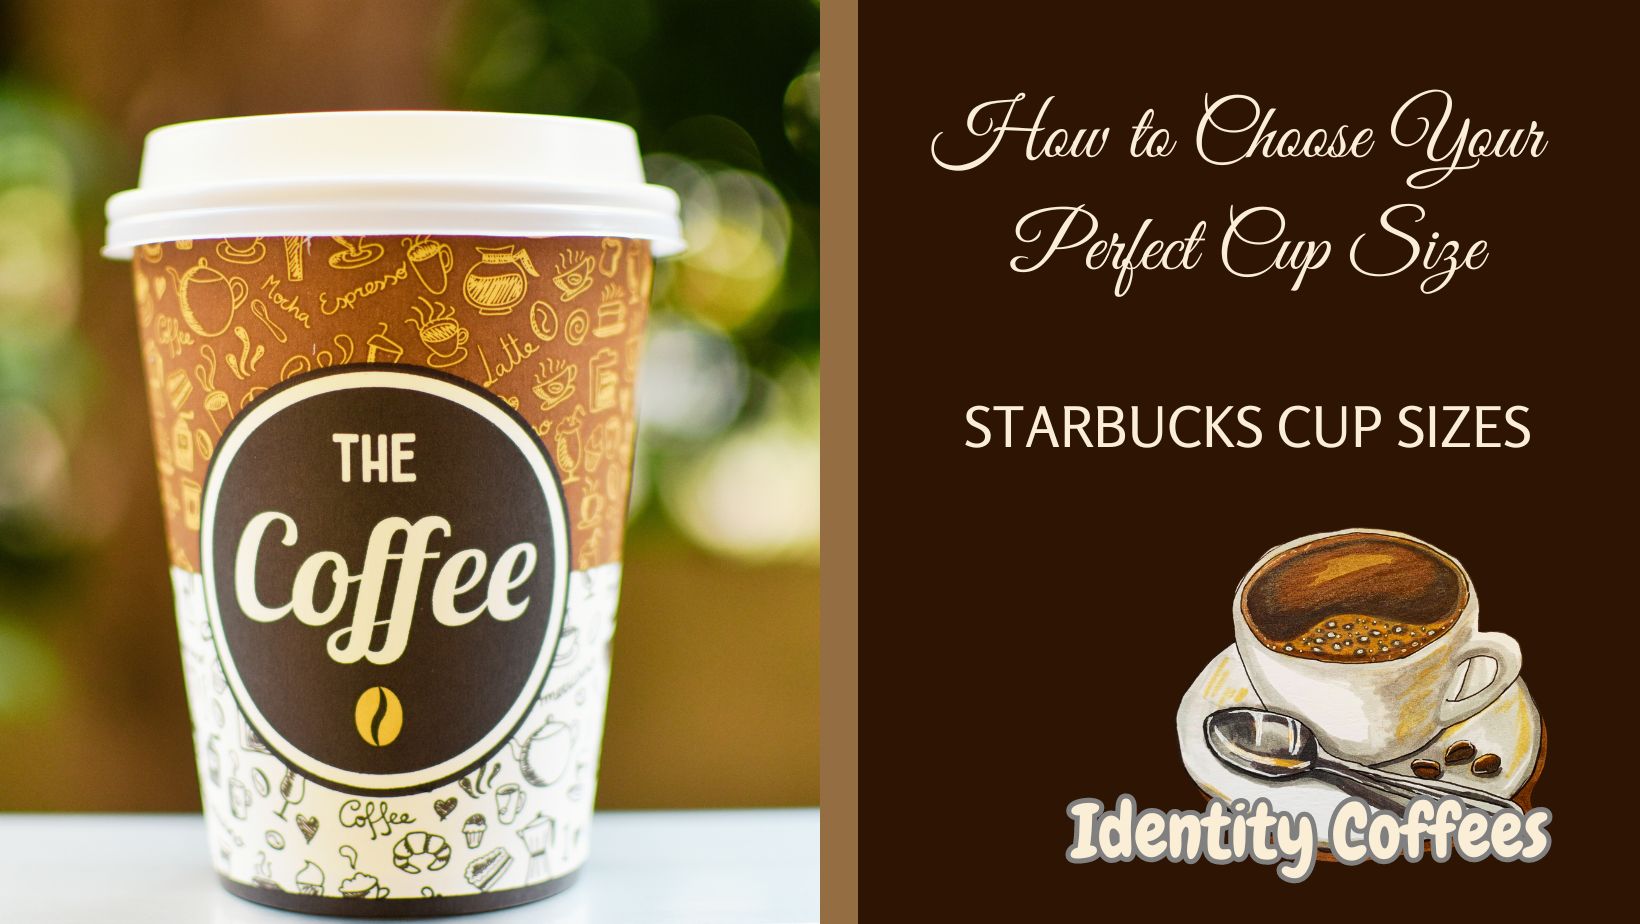 Starbucks Cup Sizes – How to Choose Your Perfect Cup Size